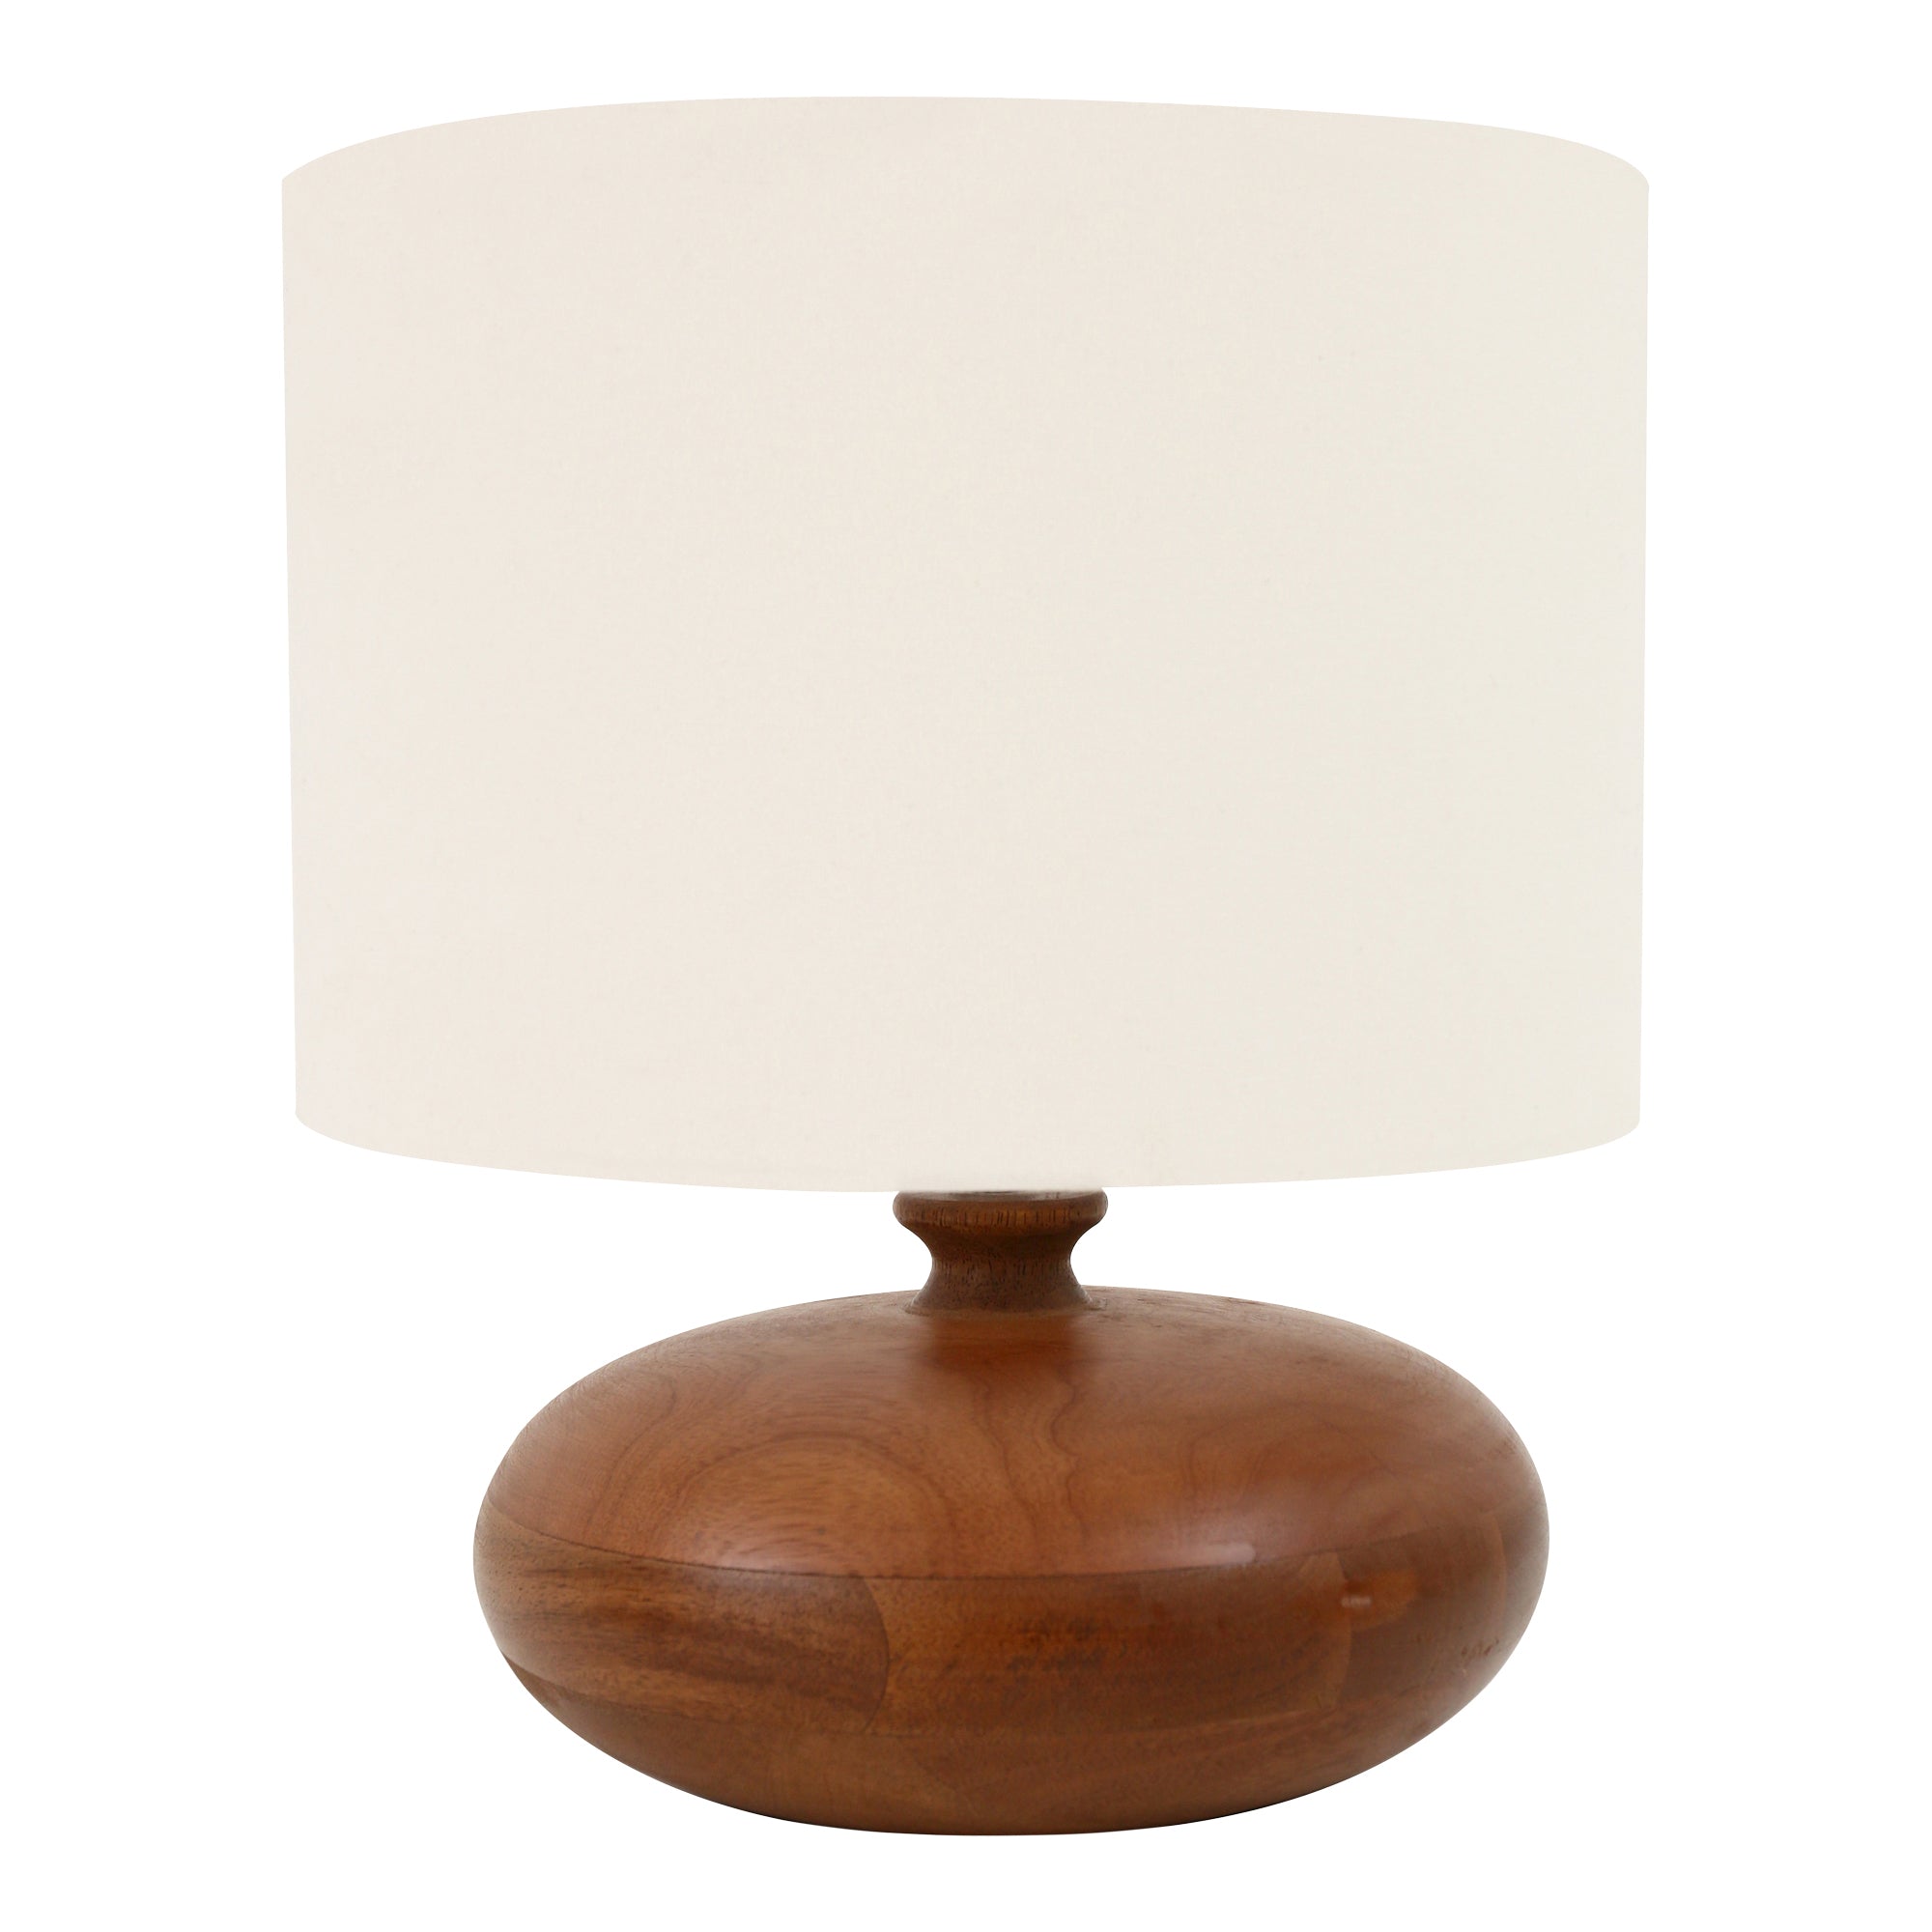 EVIE TABLE LAMP